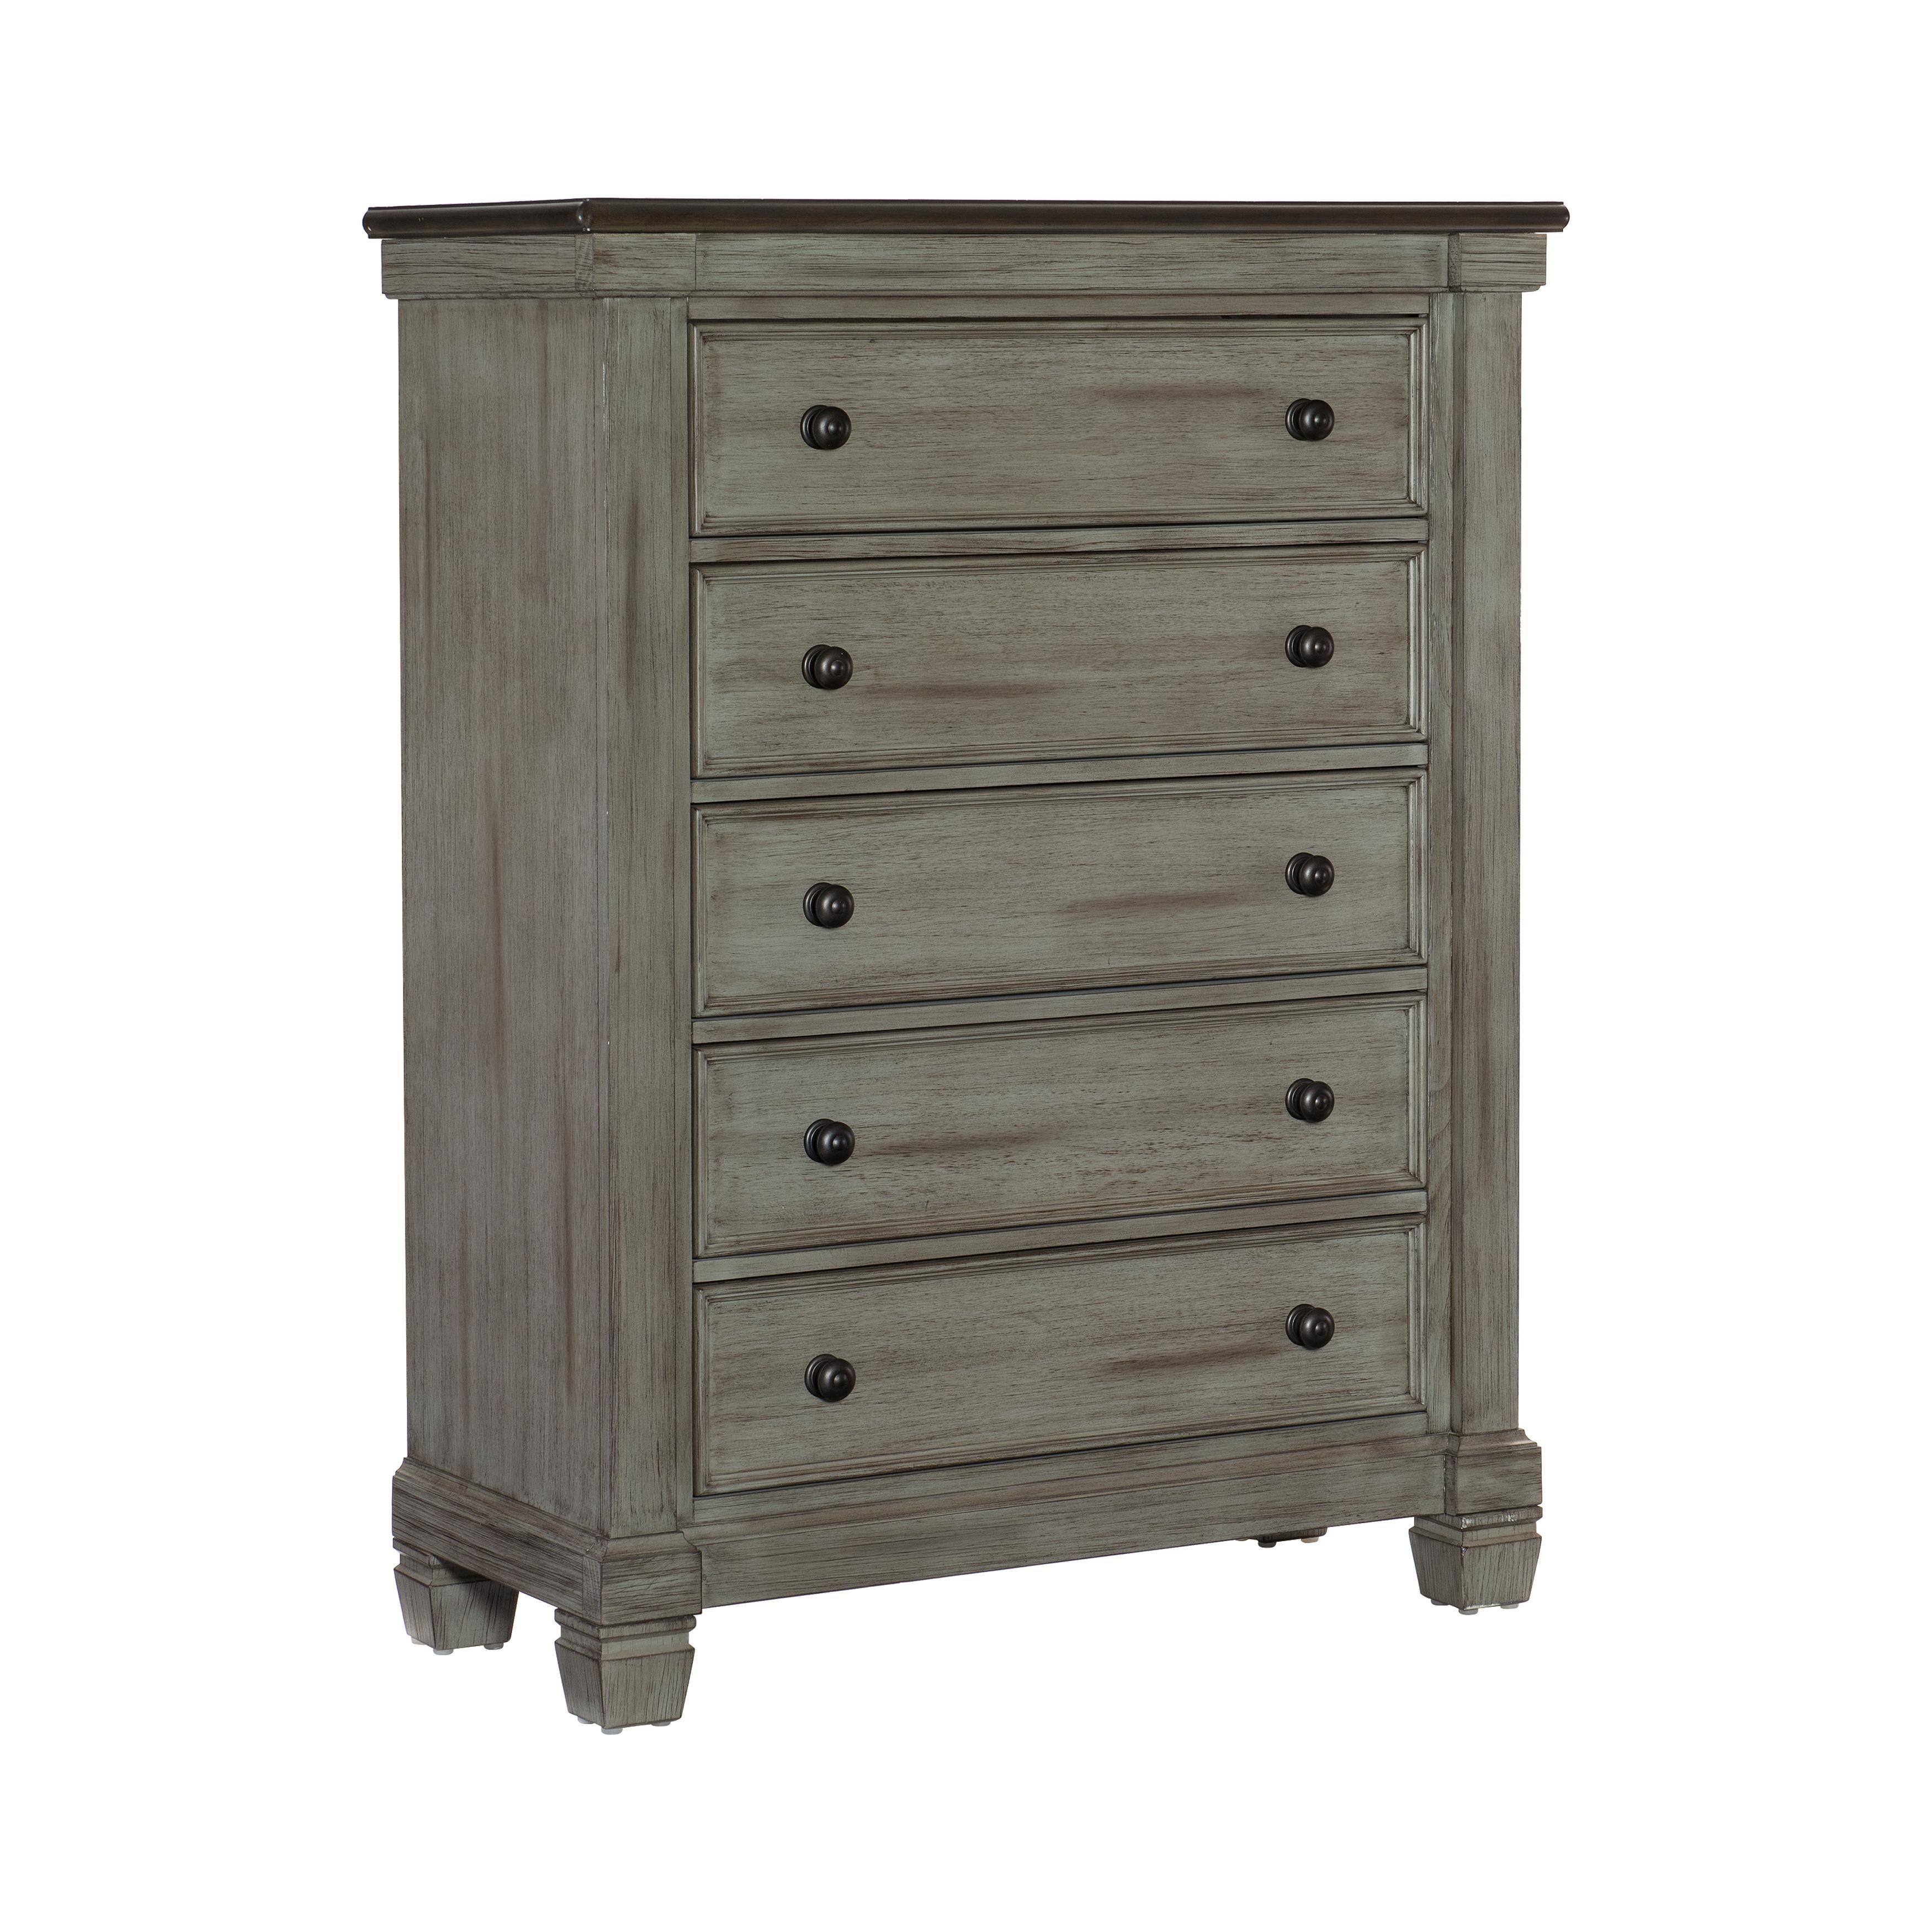 Transitional Chest 1626GY-9 Weaver 1626GY-9 in Gray, Coffee 